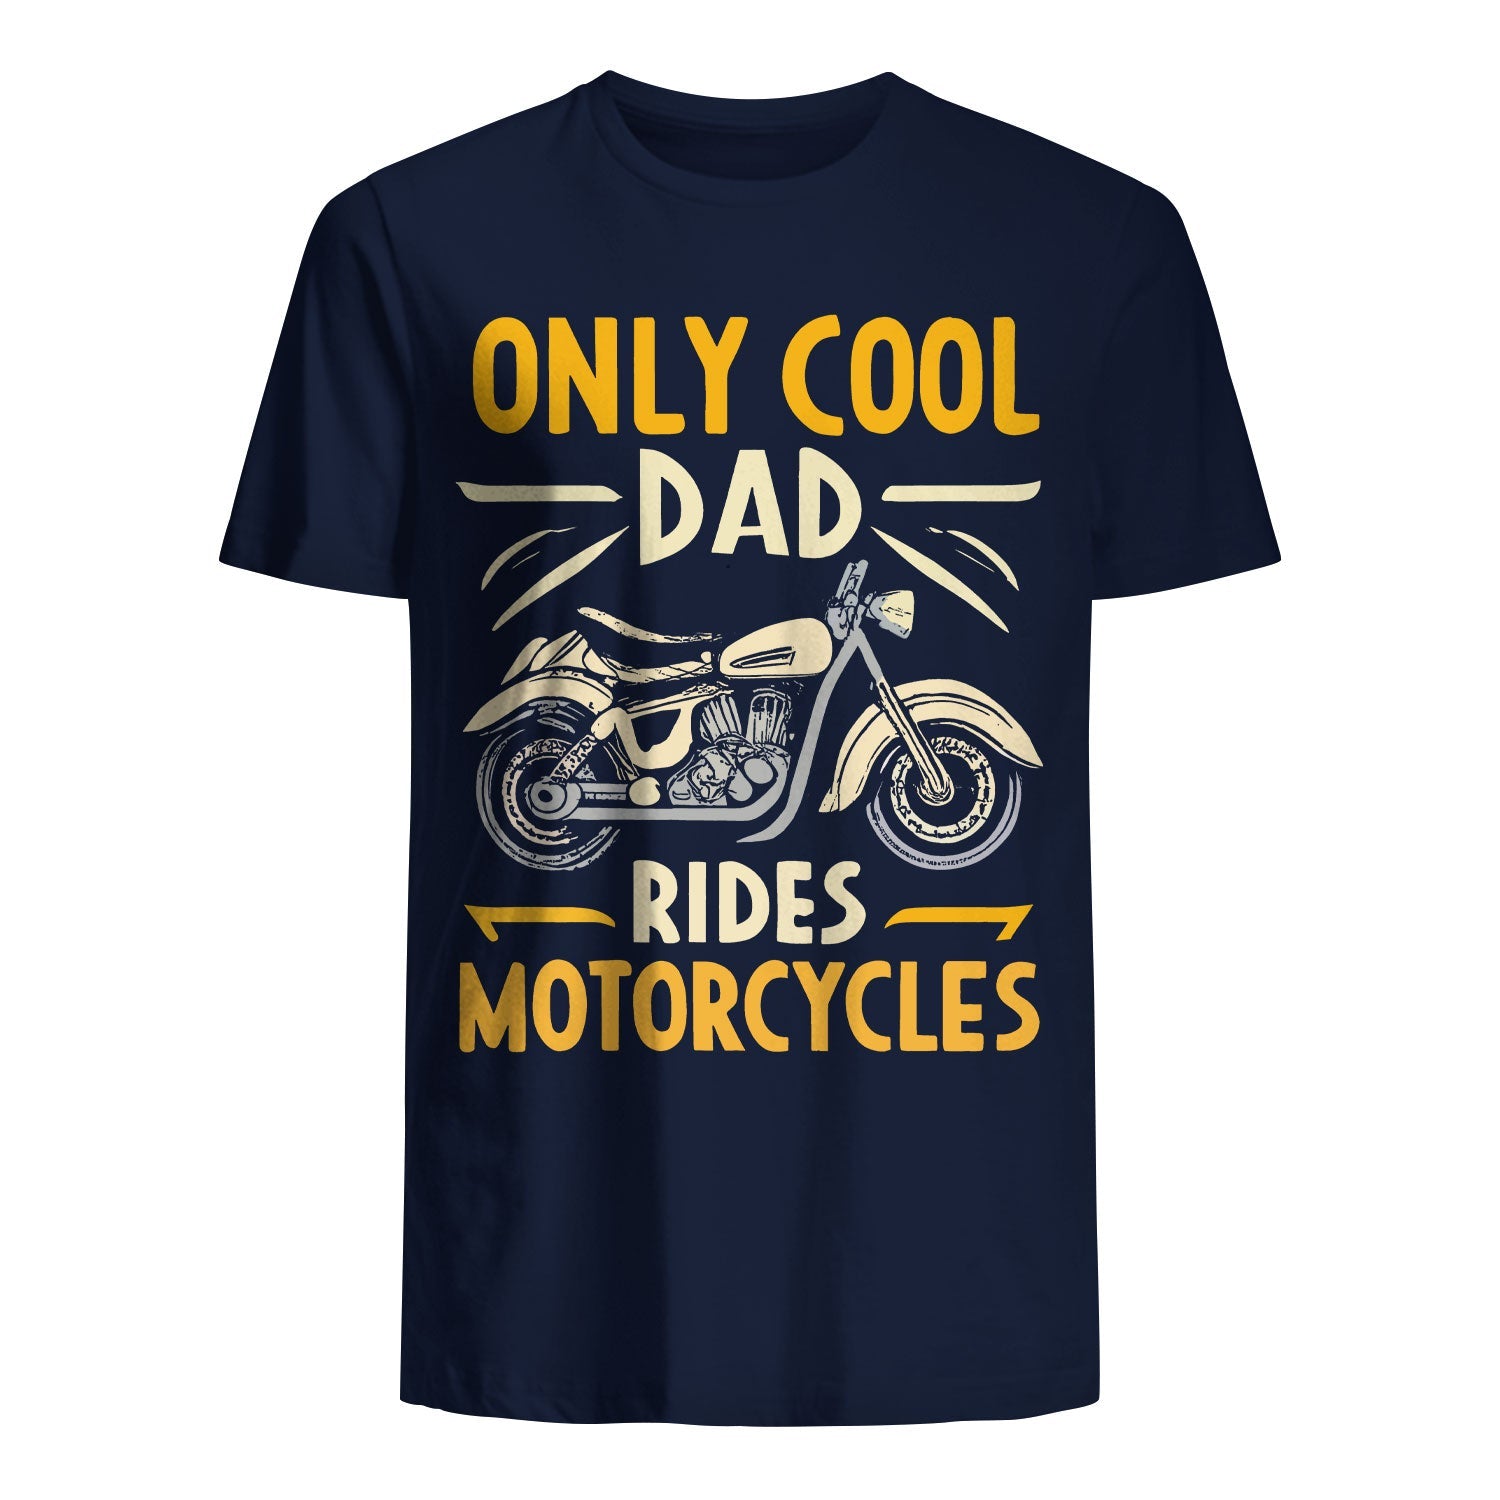 T-shirt for Dad - Cool Dad Rides Motocycles